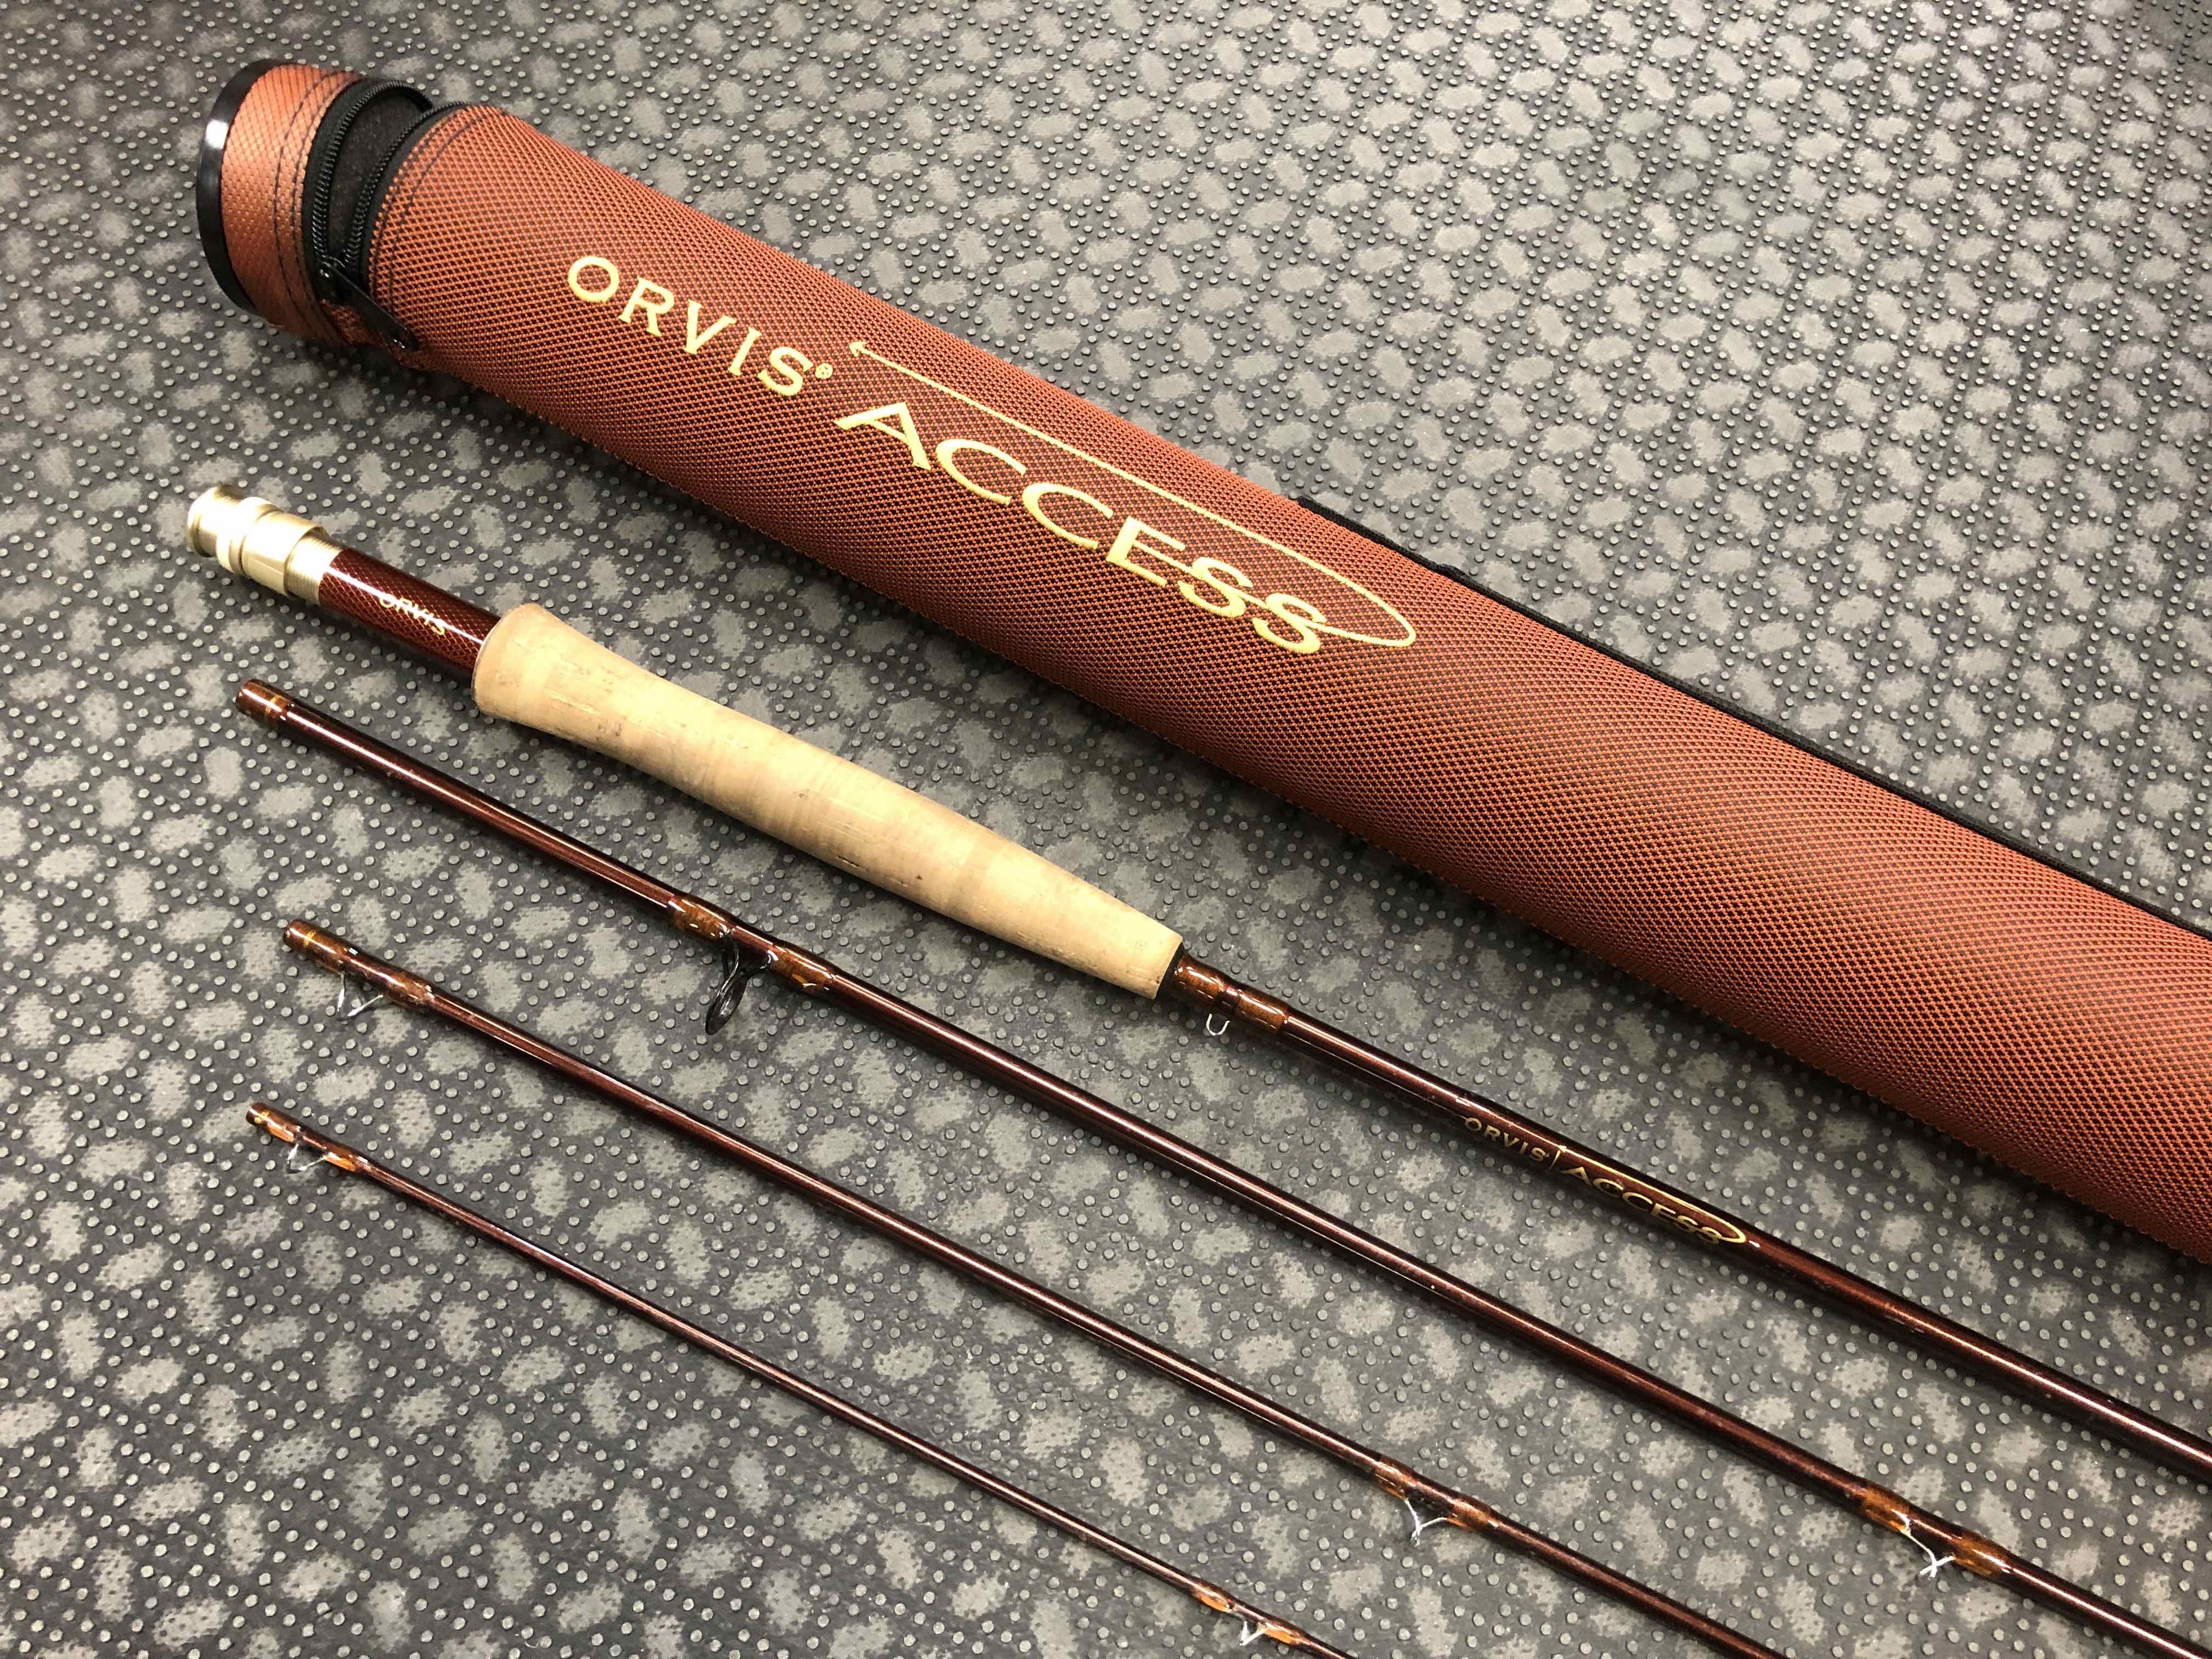 Orvis Access Review